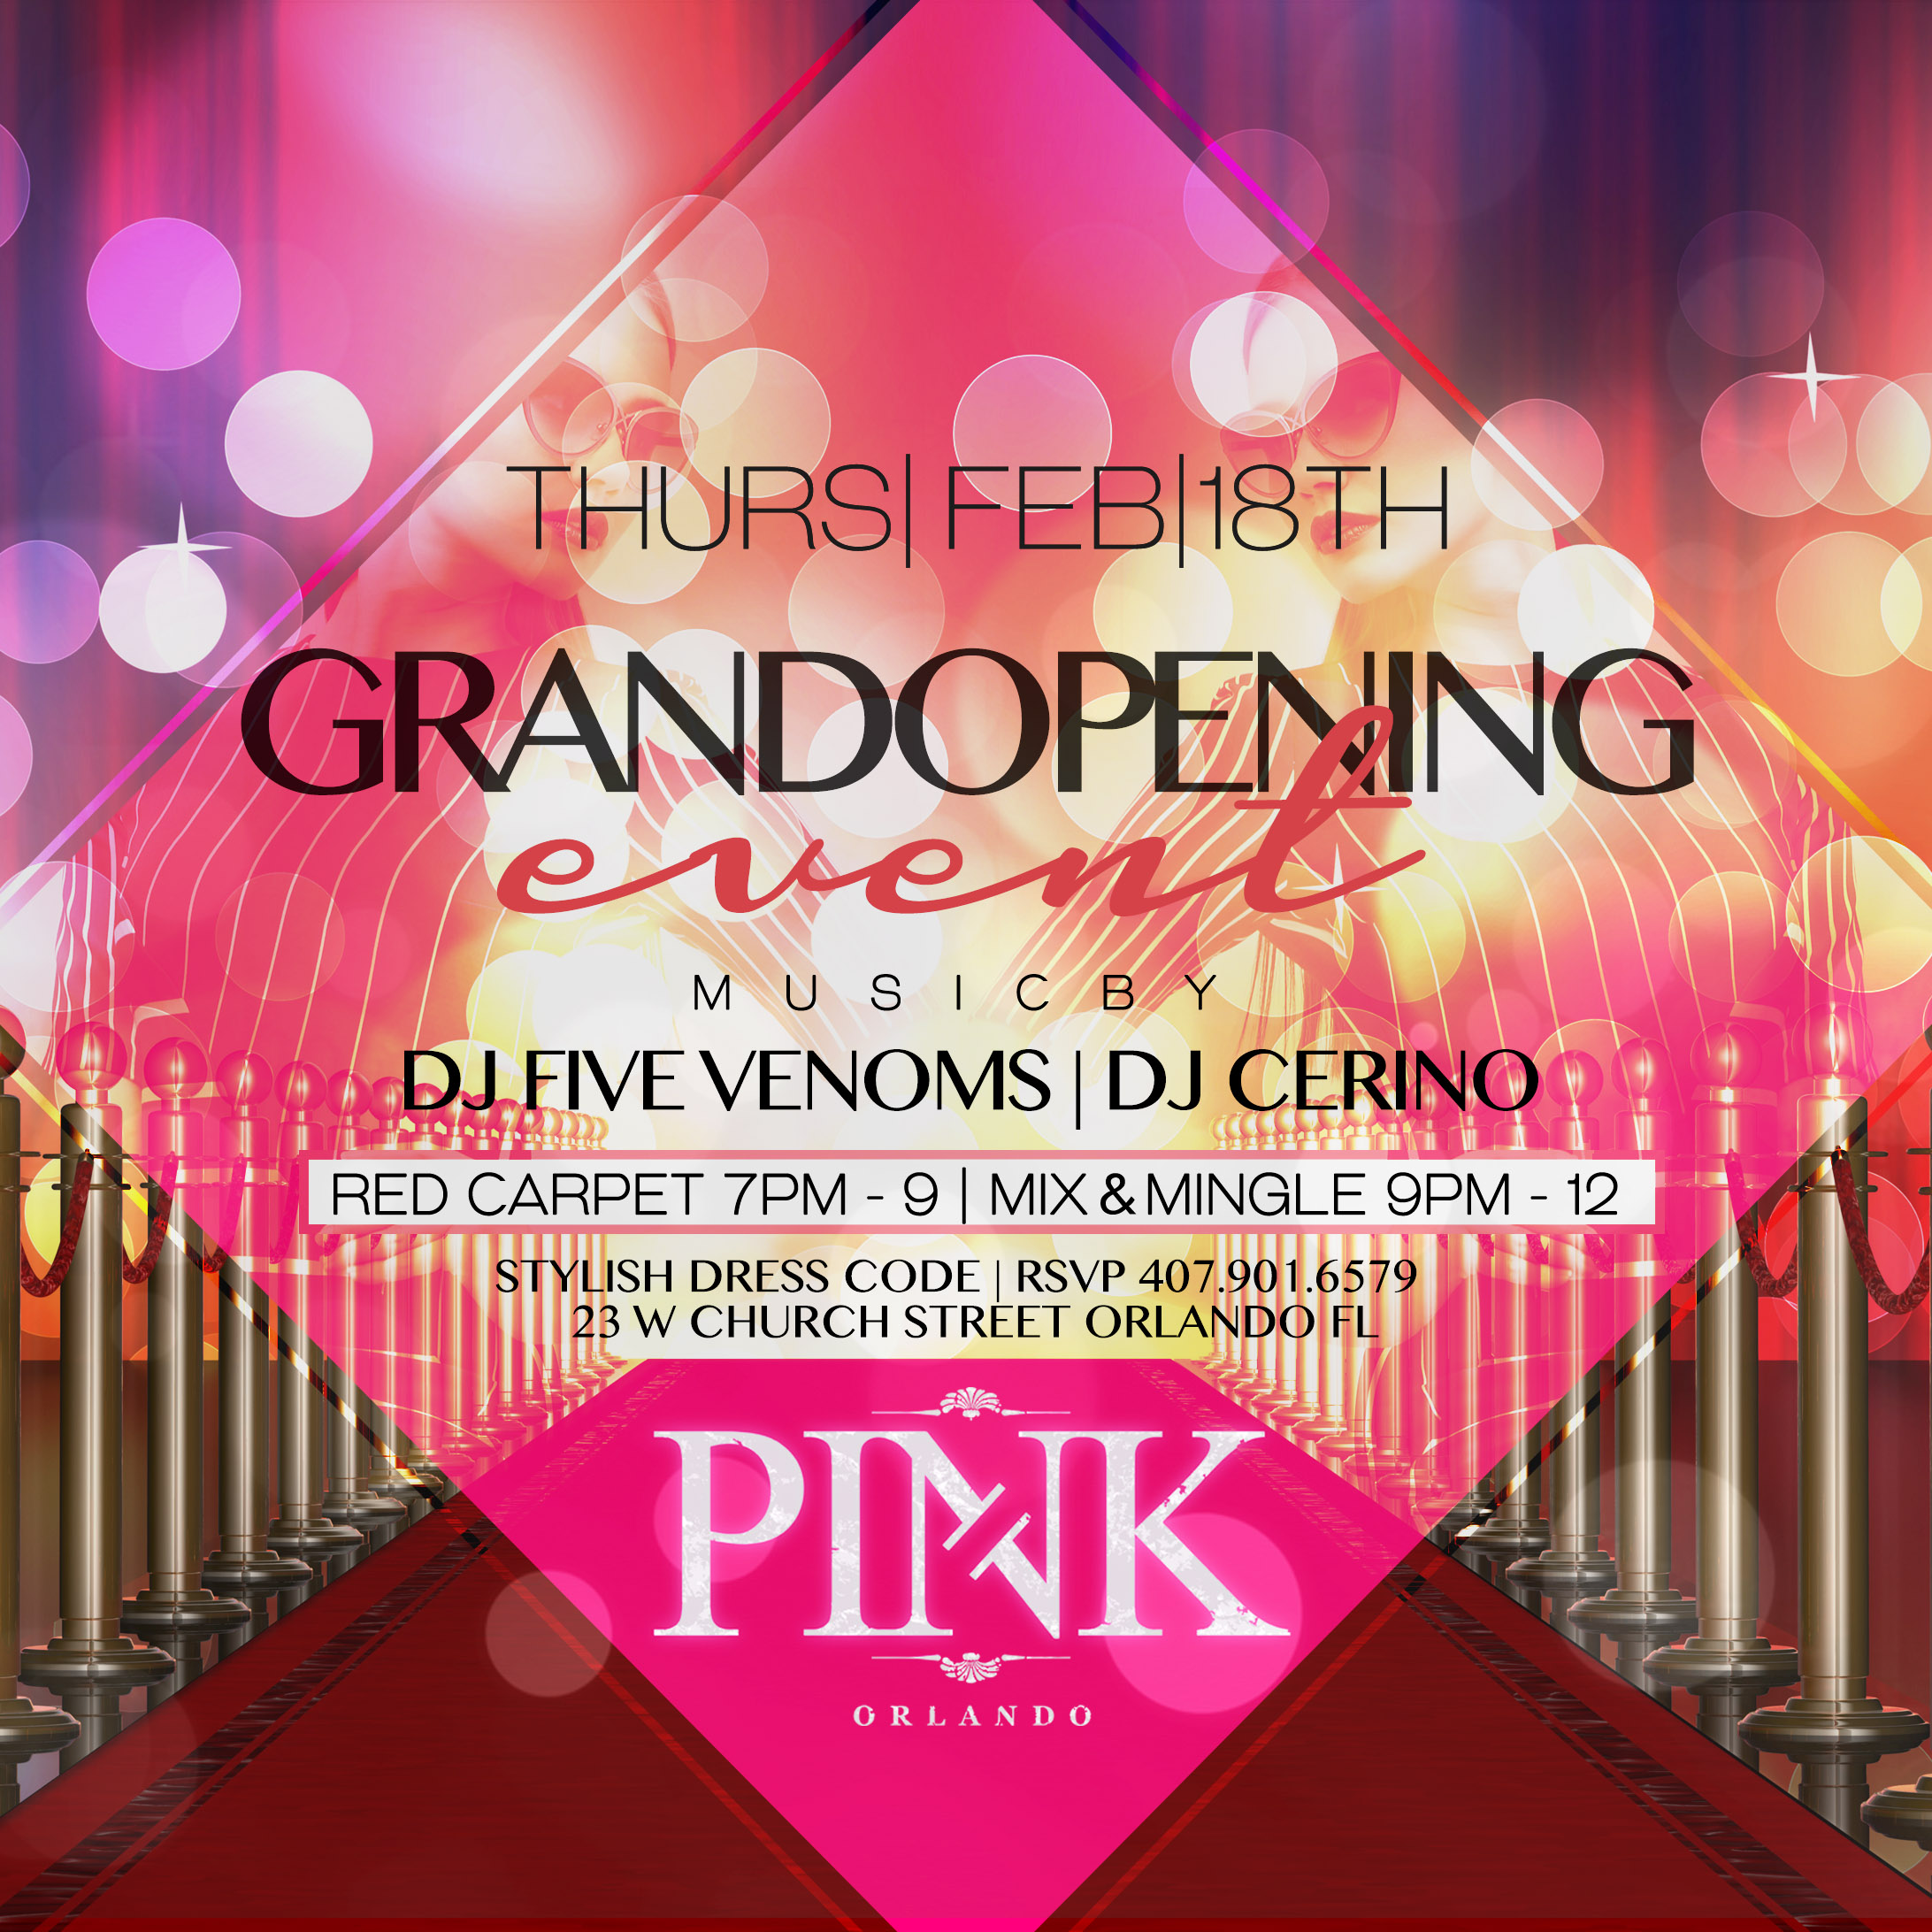 The Committee Hosts The Grand Opening of Pink Orlando, Orlando's Newest ...